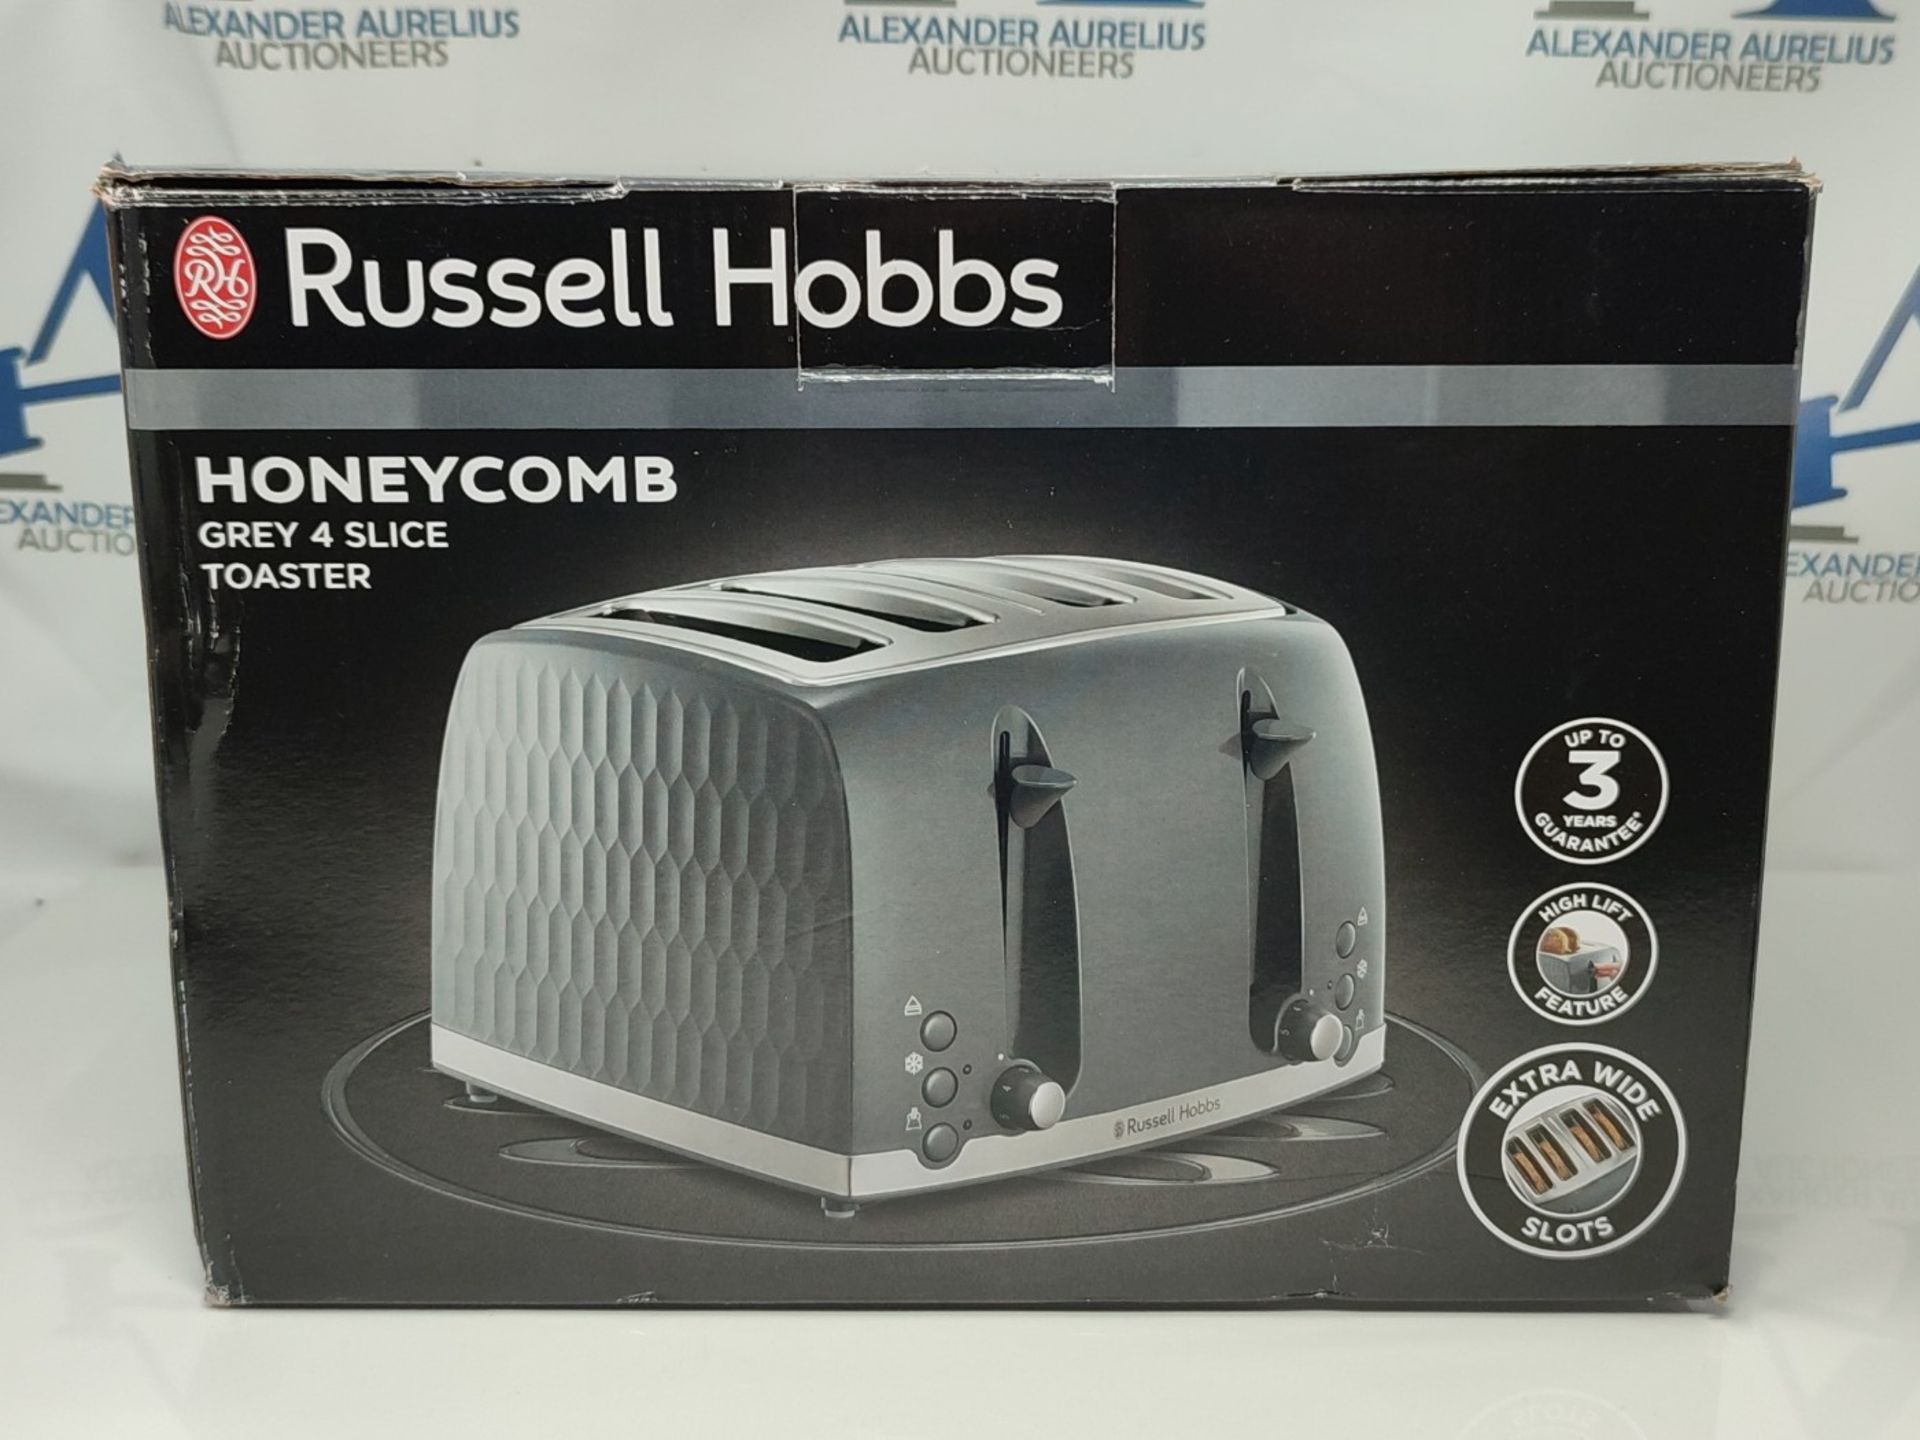 Russell Hobbs 26073 4 Slice Toaster - Contemporary Honeycomb Design with Extra Wide Sl - Image 2 of 3